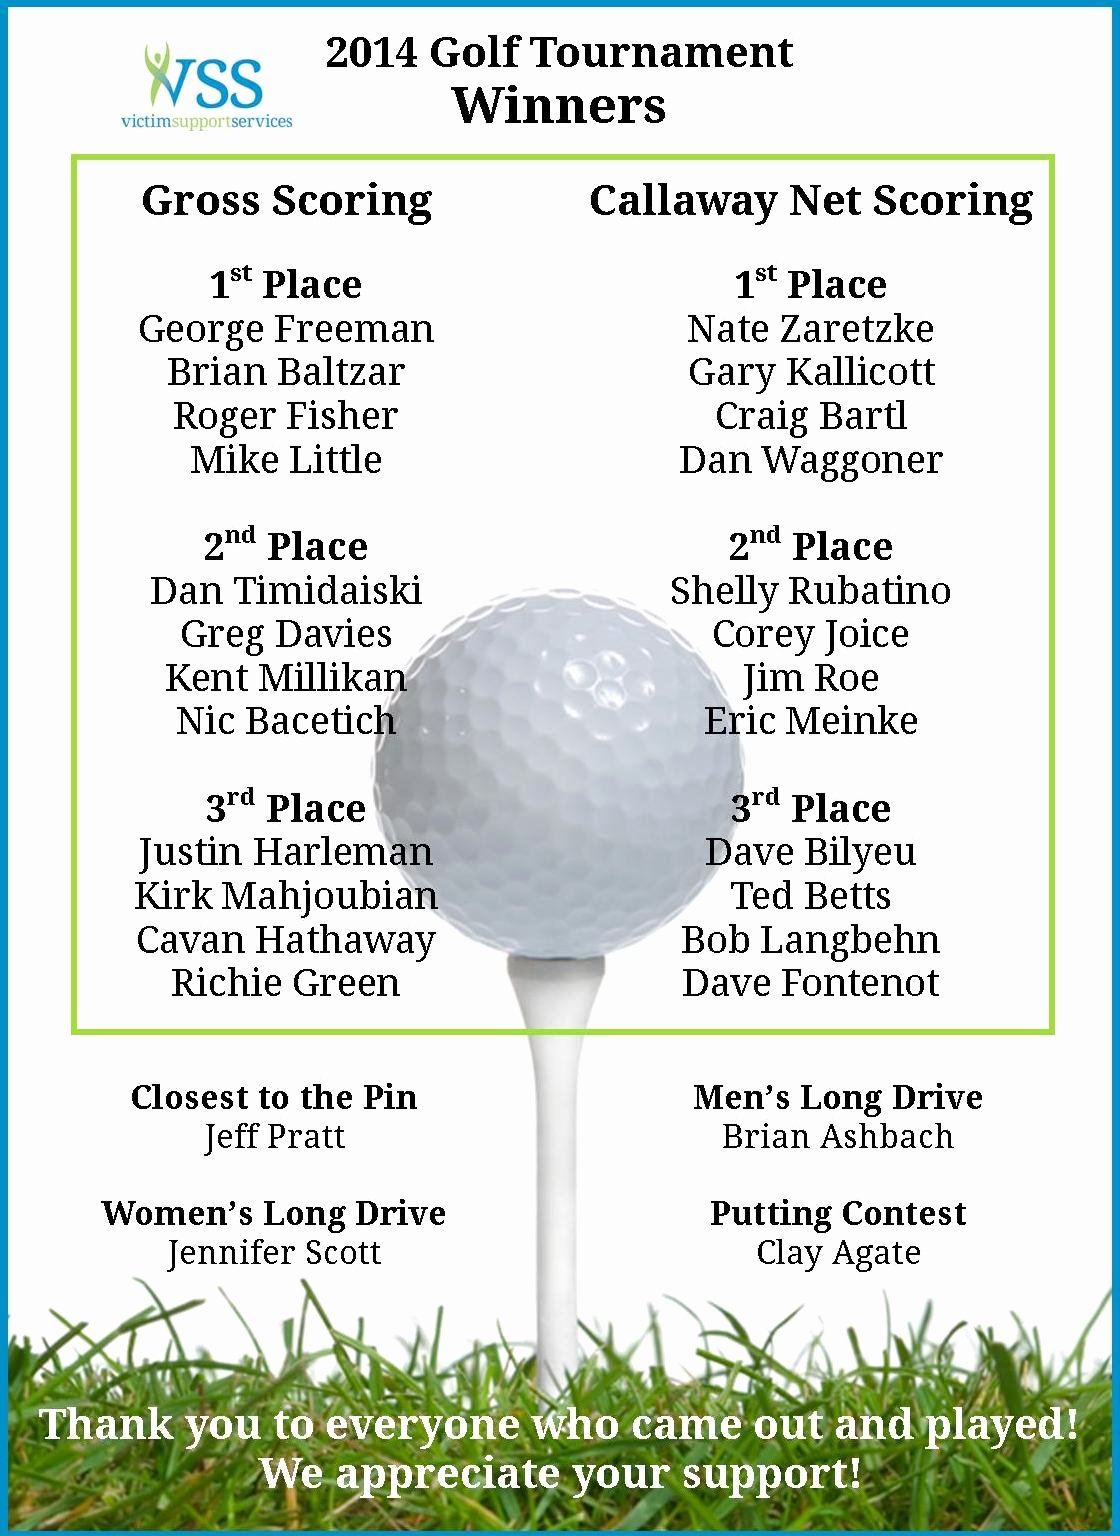 Thank You Letter to Sponsors after event Luxury Golf tournament Thank You – Victim Support Services